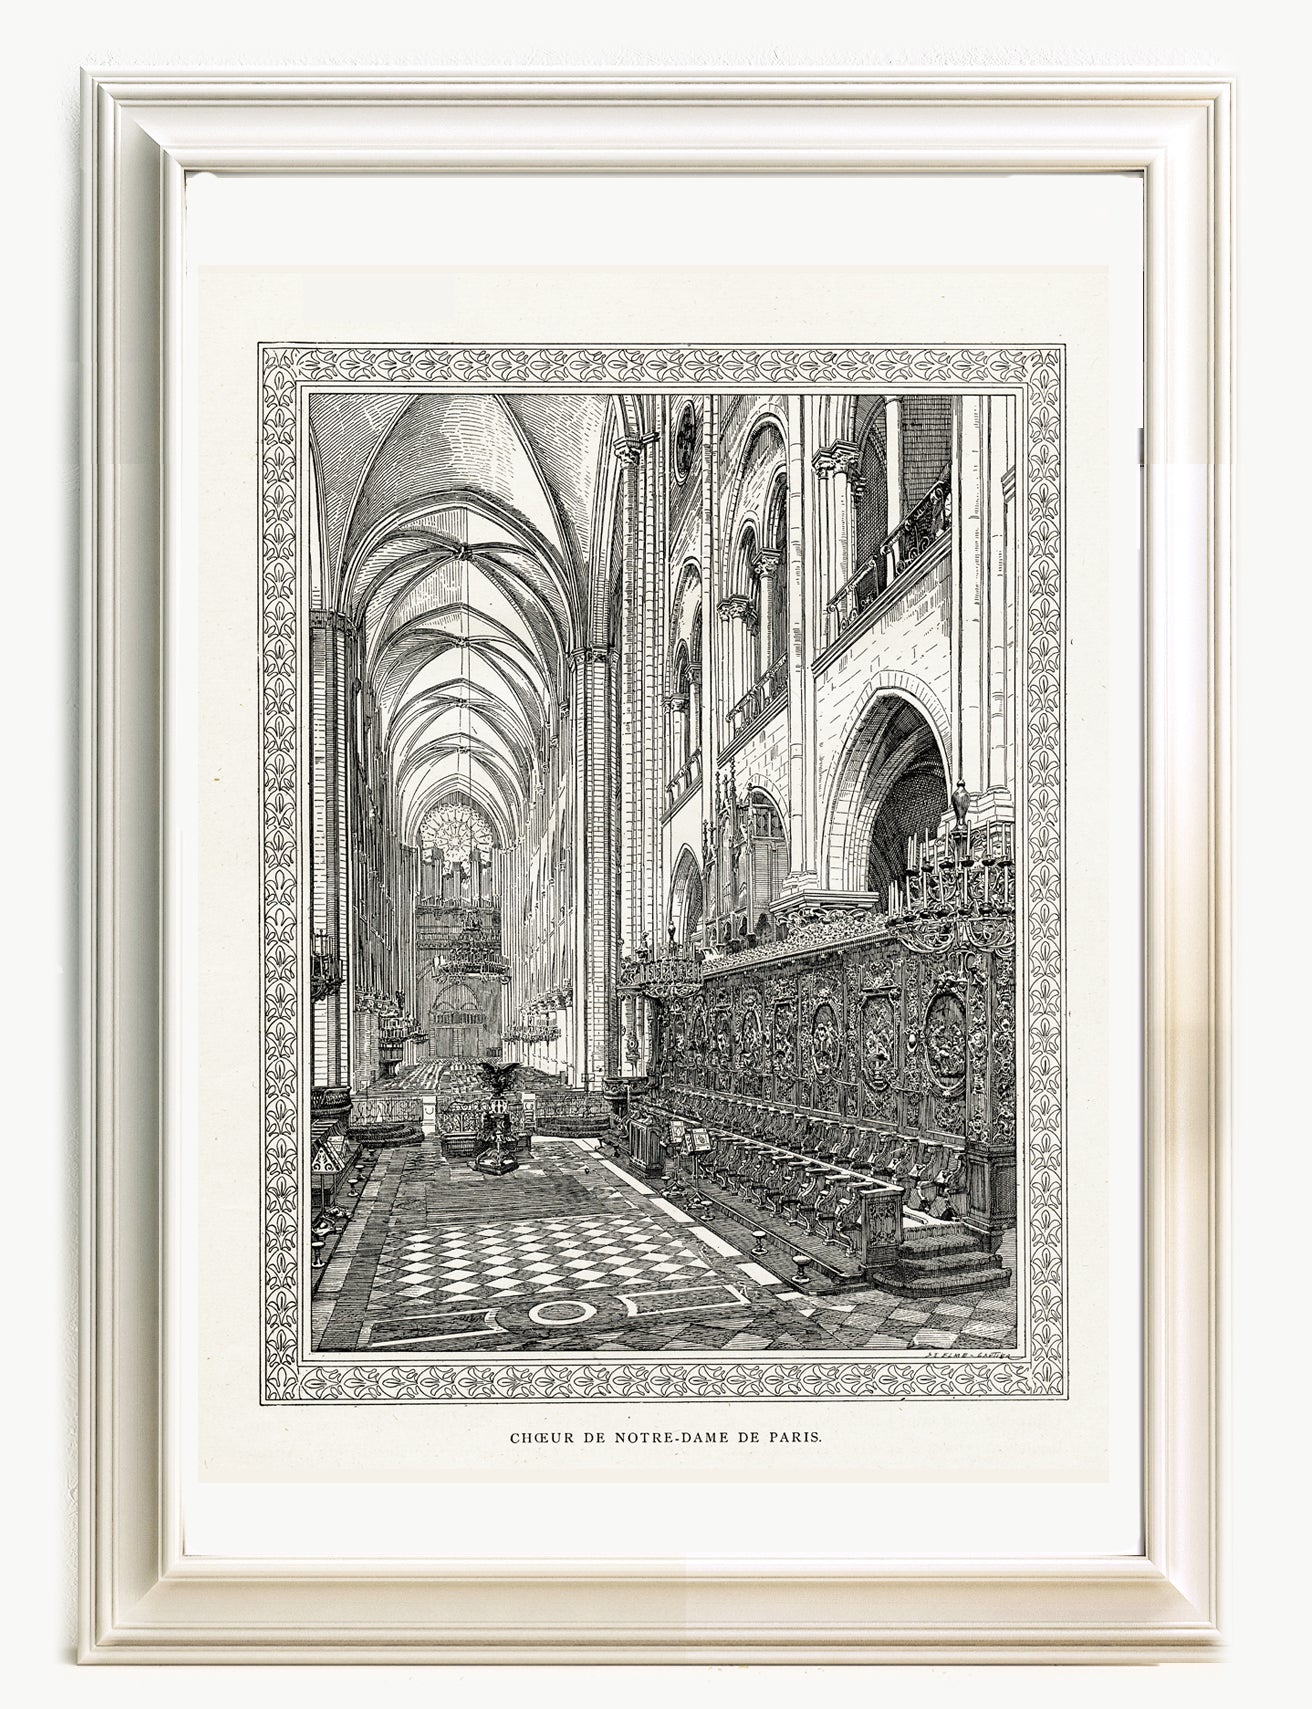 large black and white poster of the choir of notre dame de paris church with paving and pews